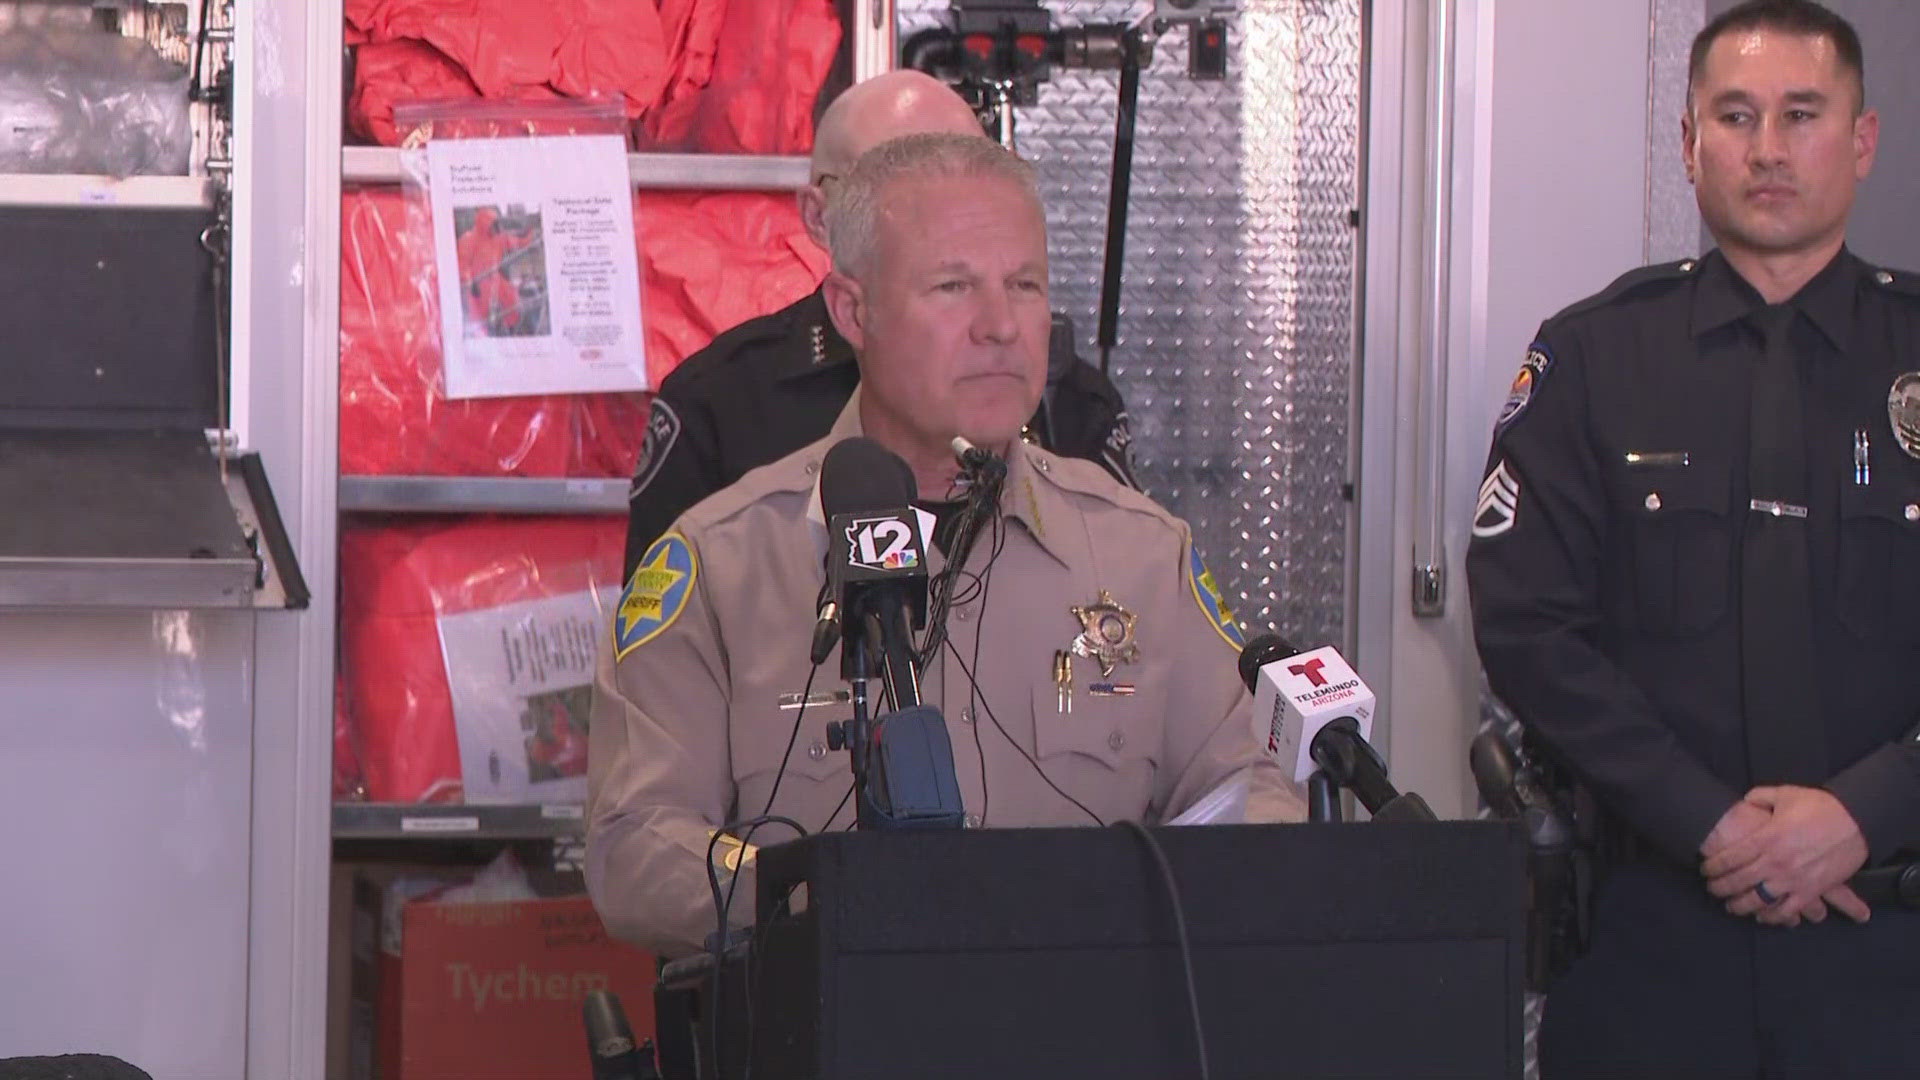 “As we know, fentanyl continues to plague our communities, plague our state and plague our nation,” Sheriff Russ Skinner said during the news conference.